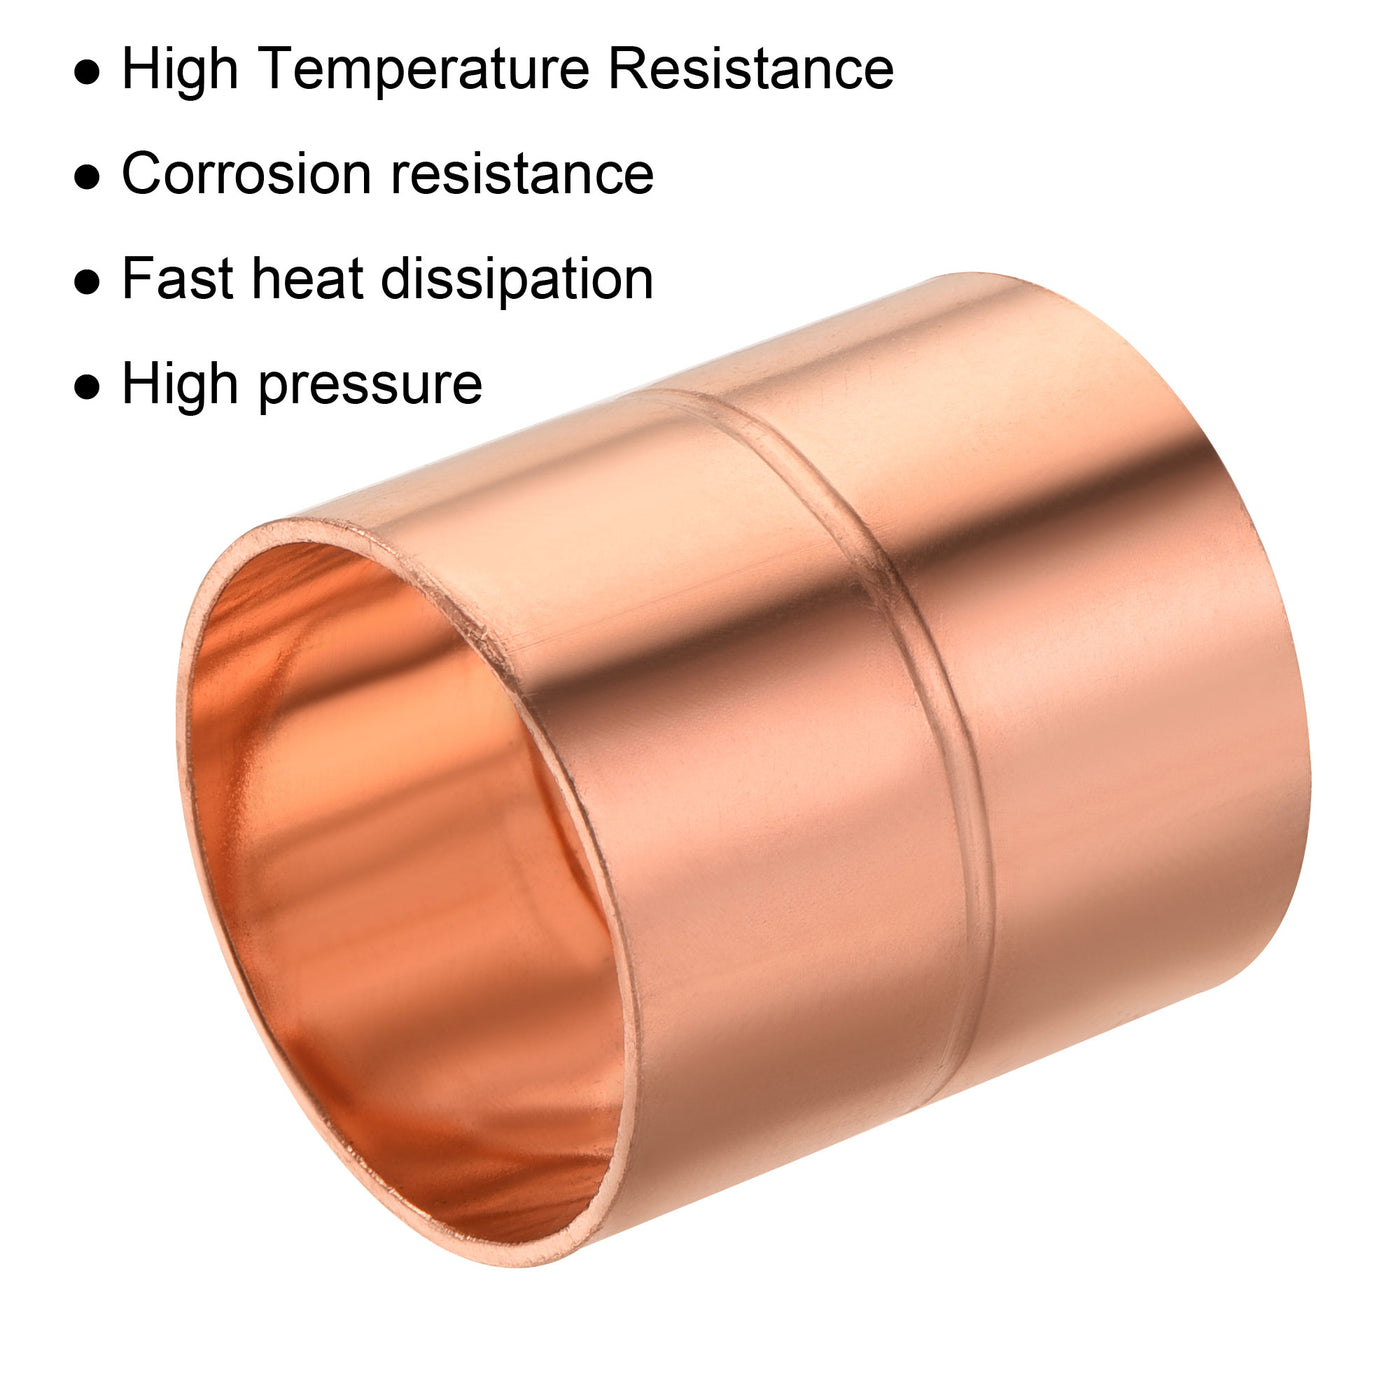 Harfington Straight Copper Coupling Fittings, ID Welding Joint for HVAC Air Conditioner